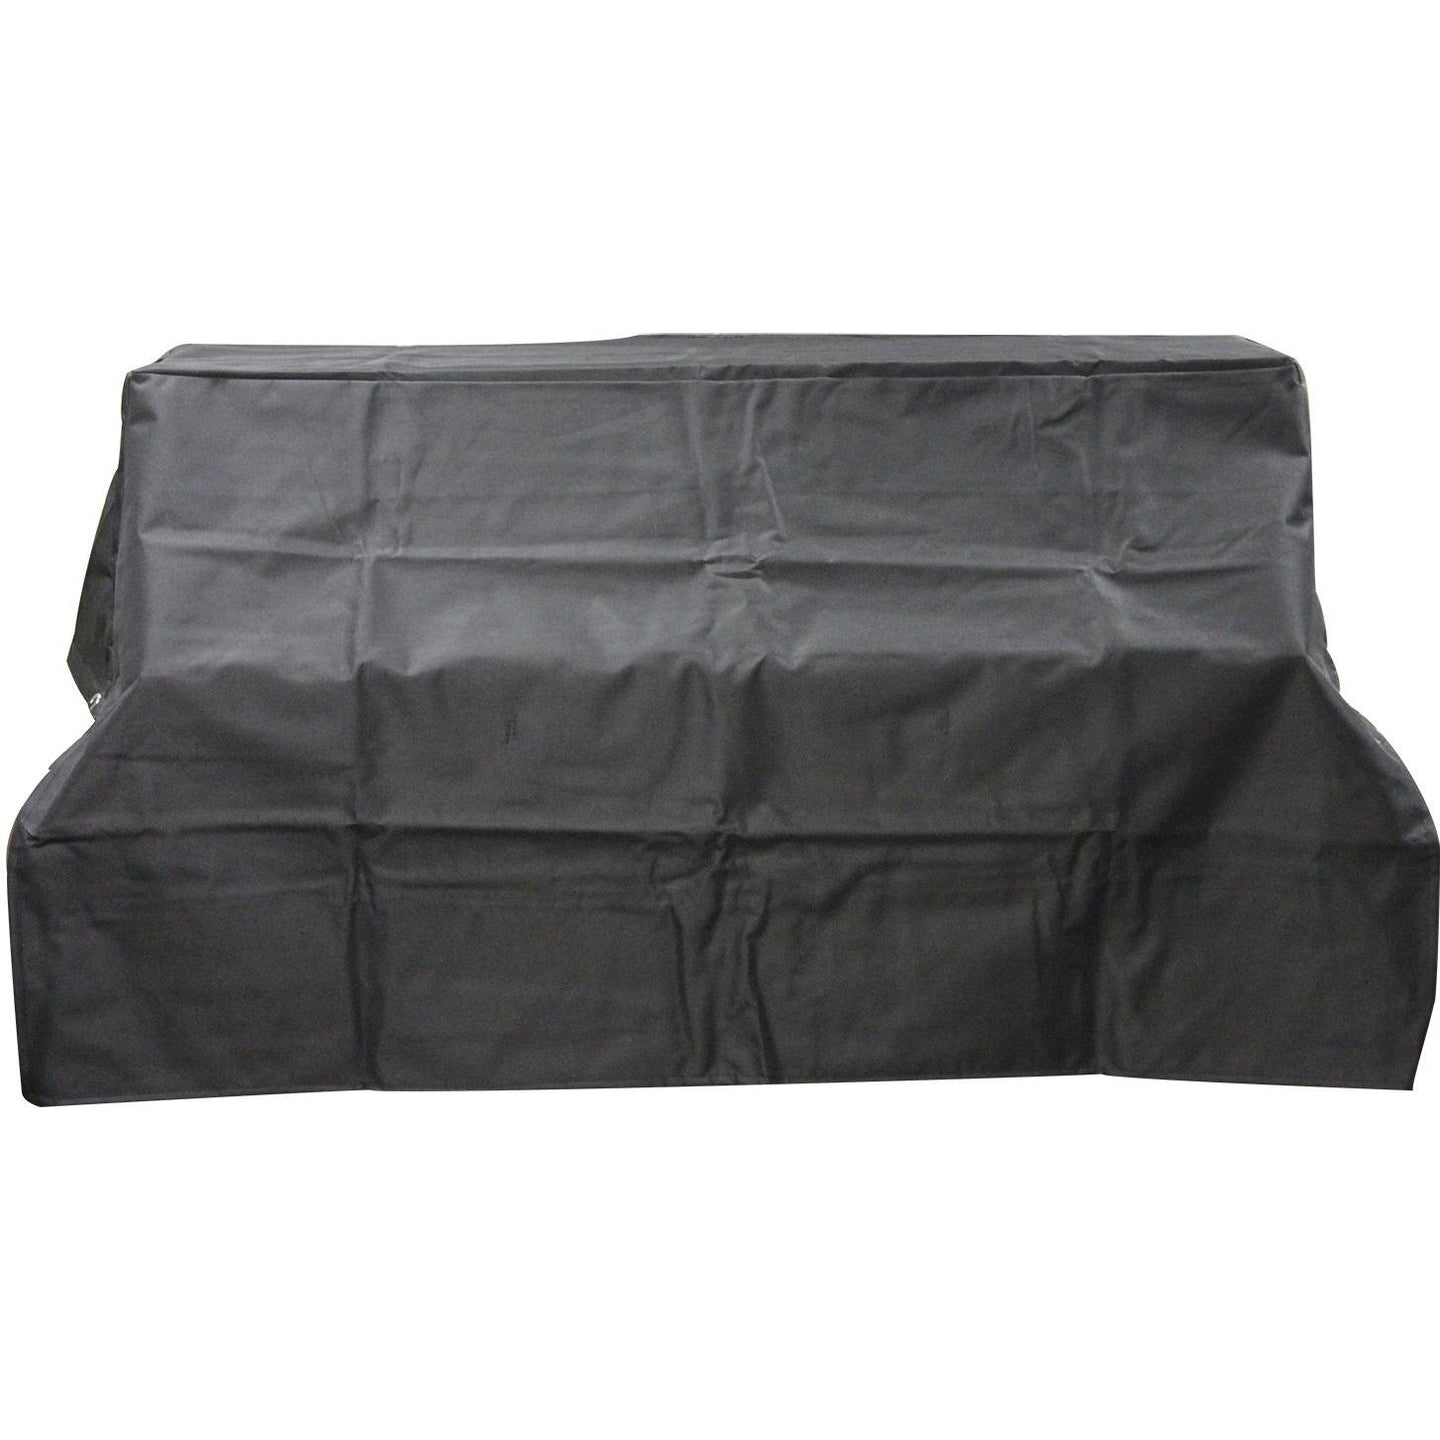 Summerset Deluxe Grill Cover For 44-Inch TRLD Built-In Gas Grills